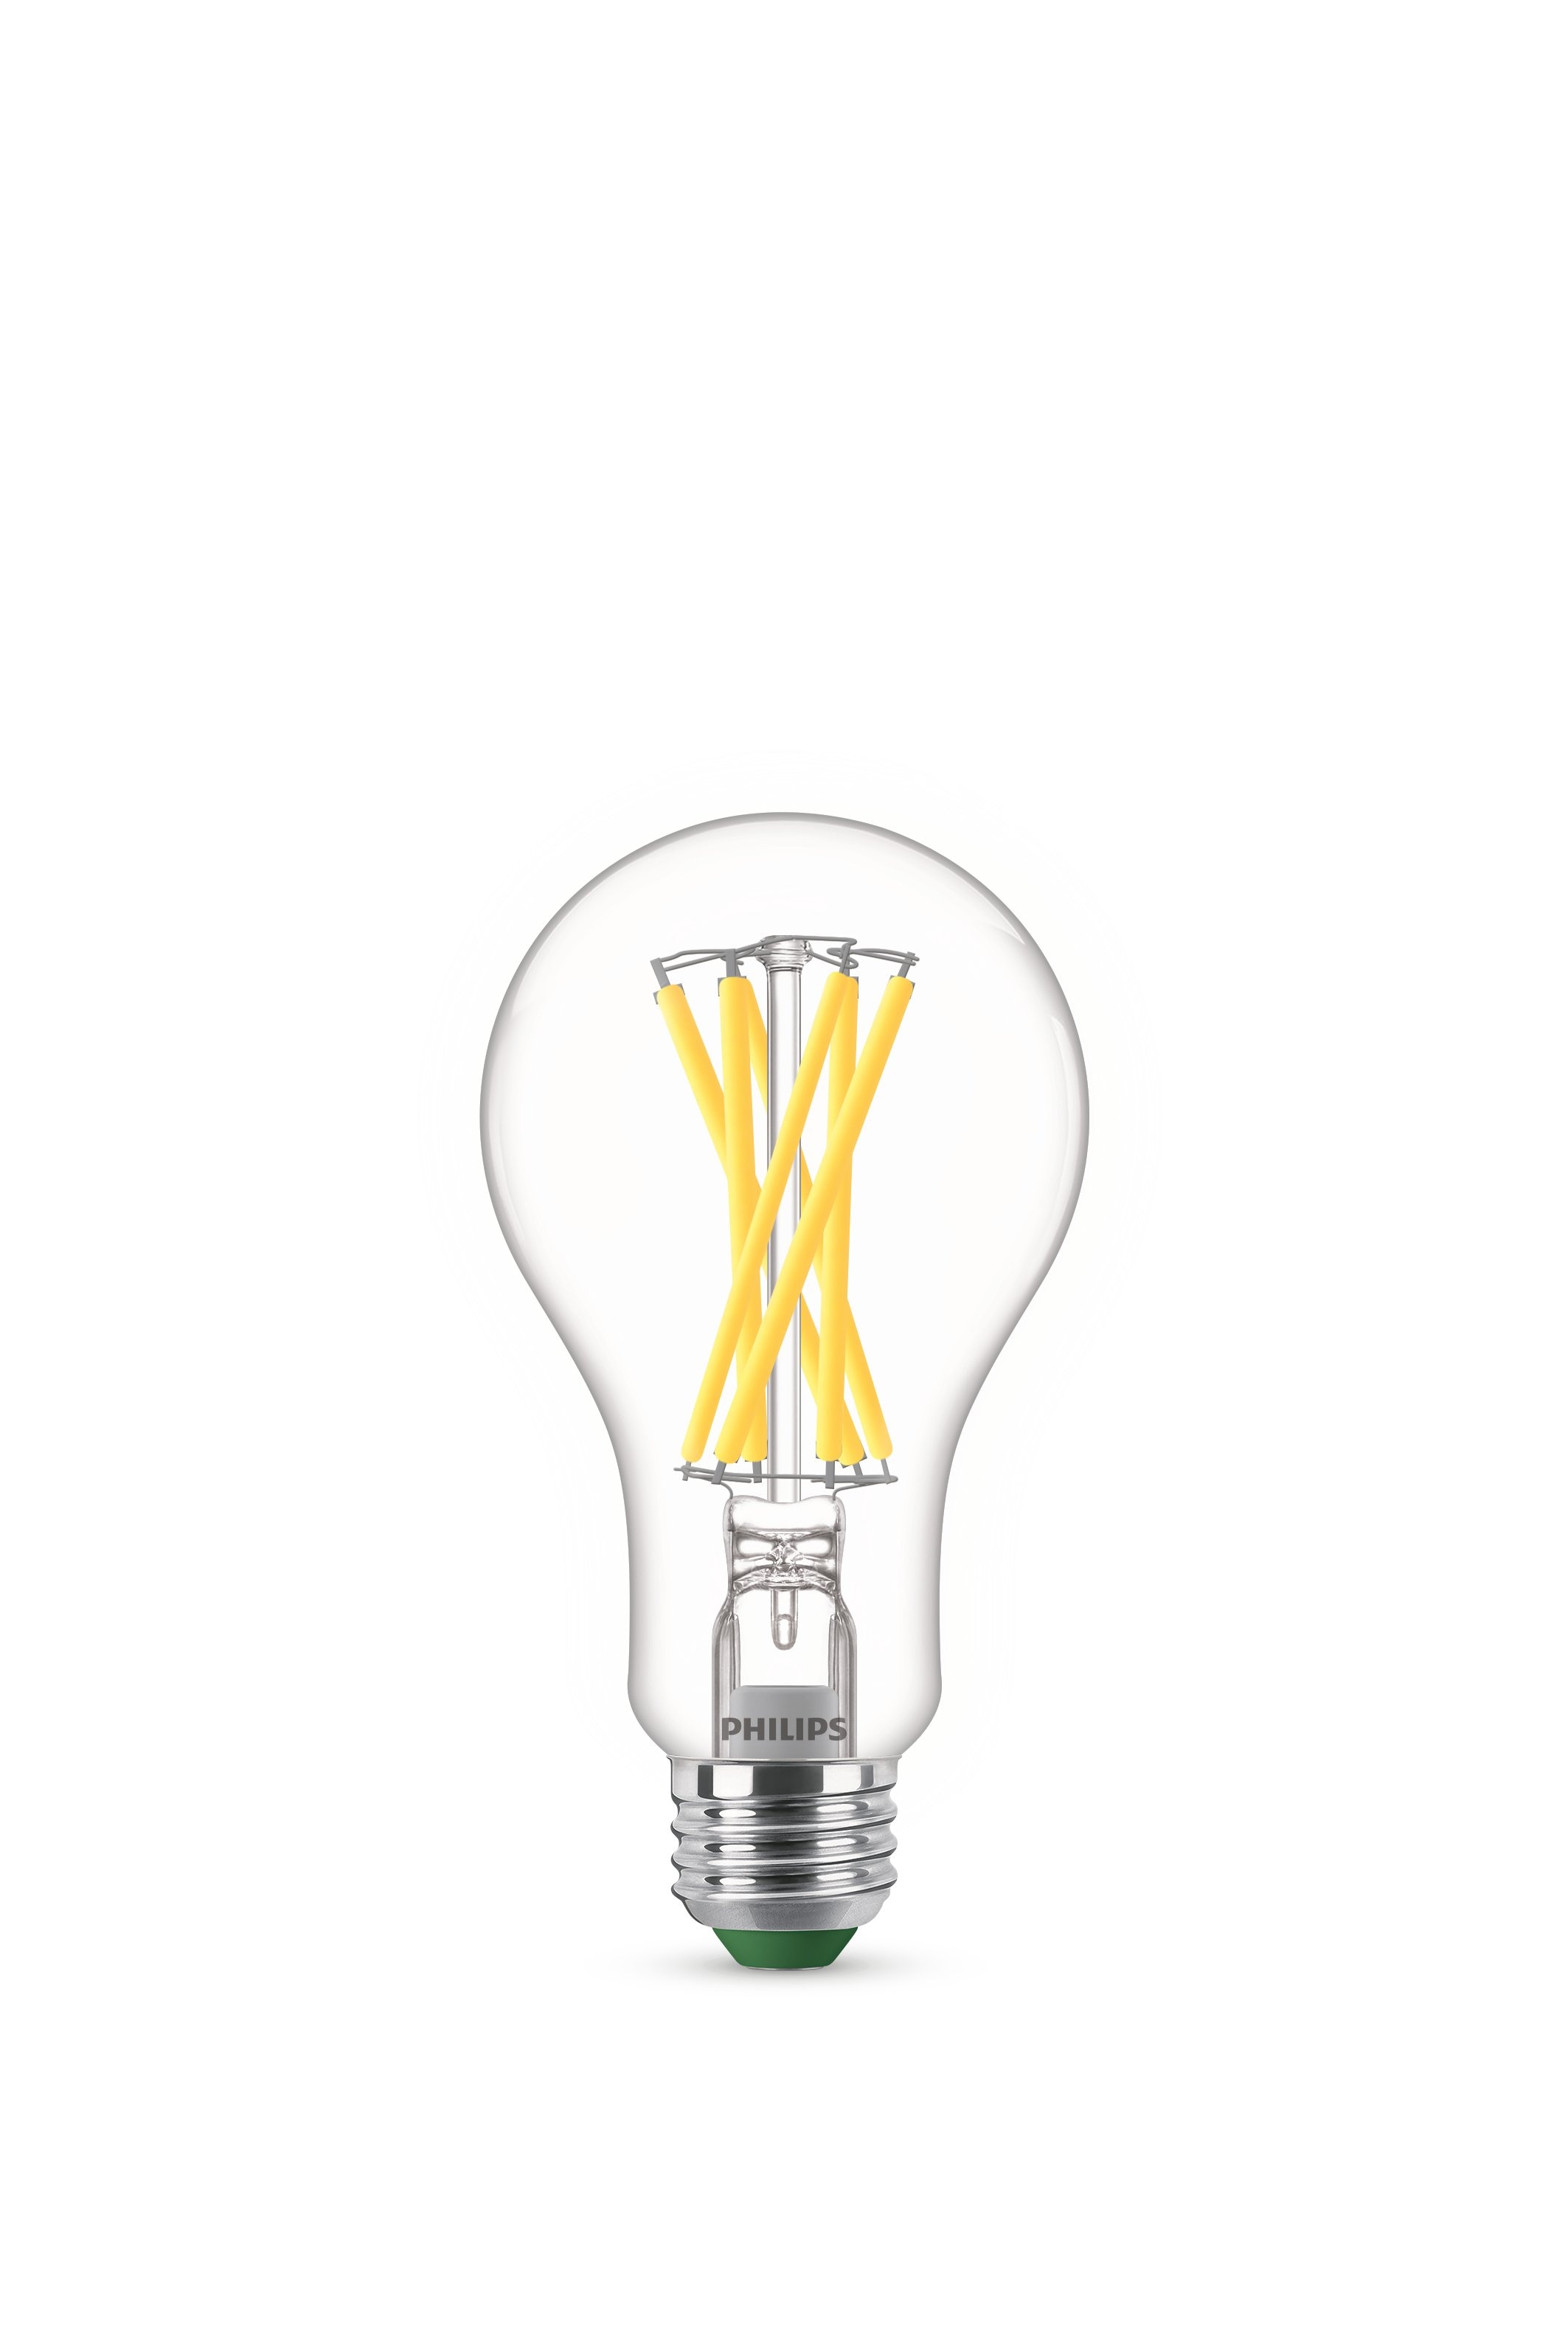 Philips unveils world's first LED replacement for most common household  light bulb